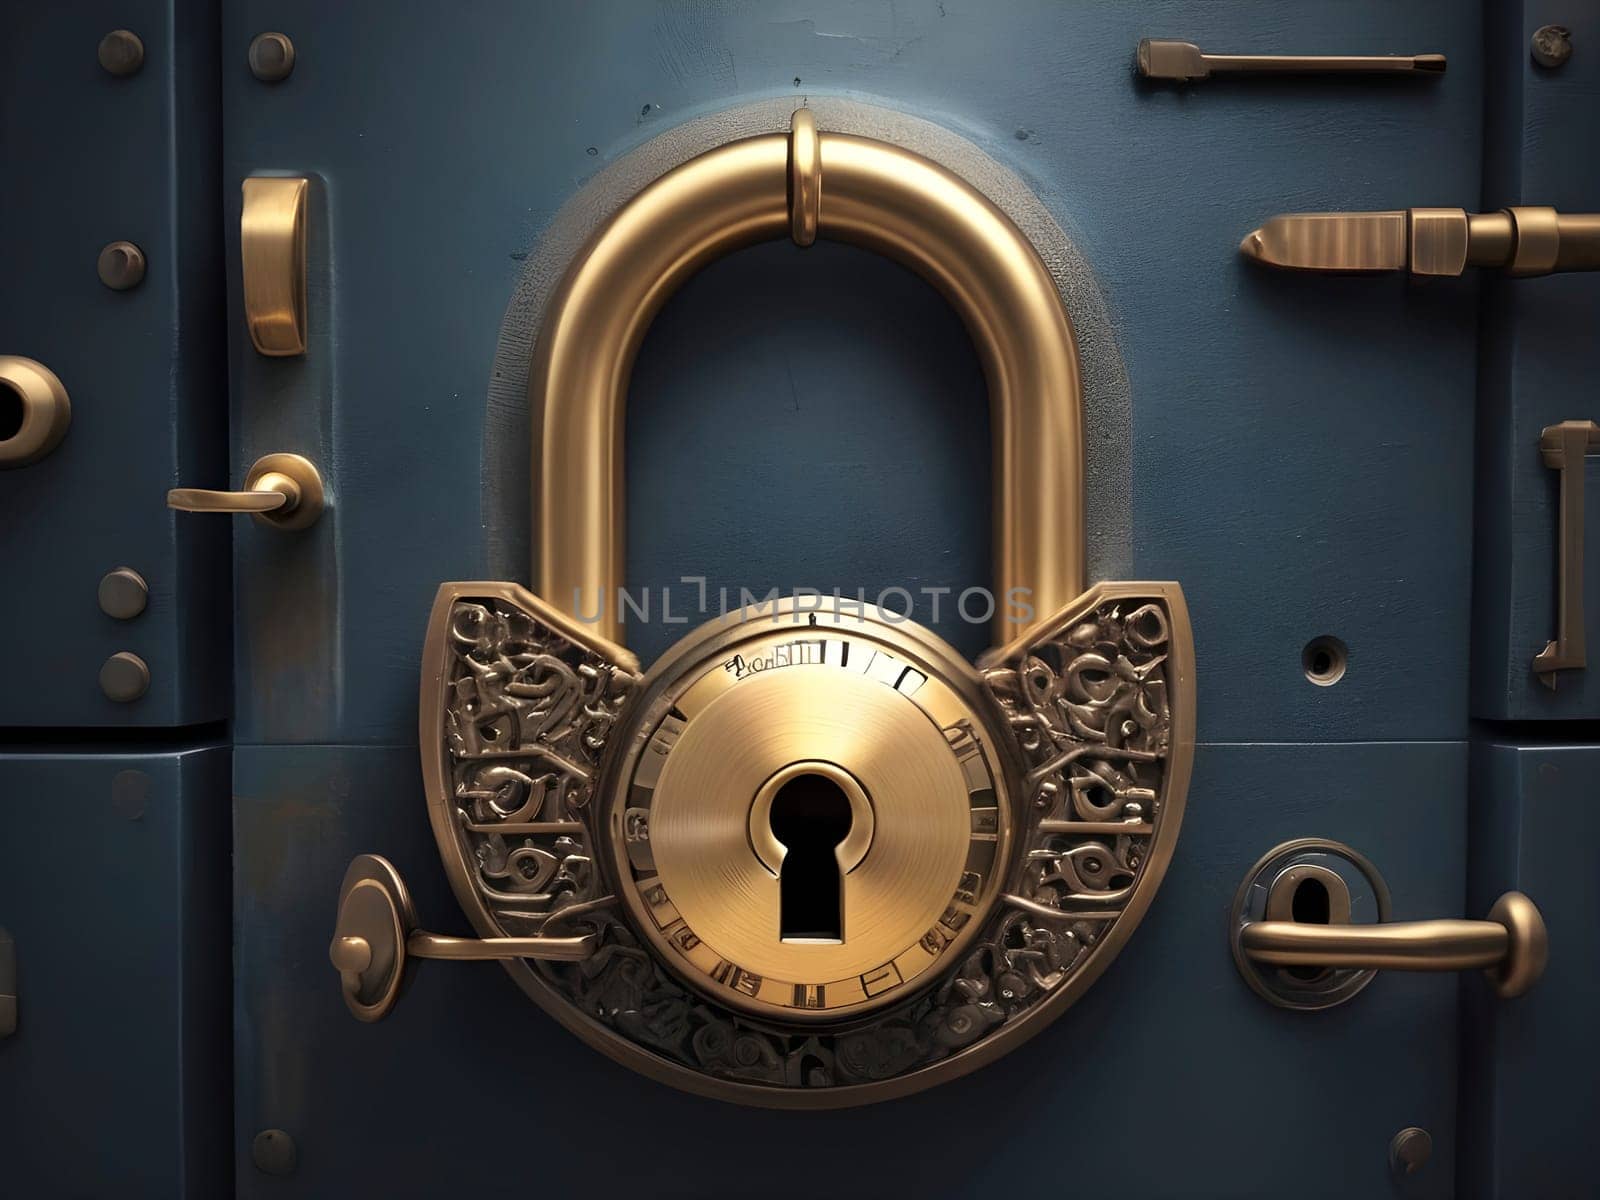 Data Fortress. The Art of Encryption in Lock and Key Imagery.